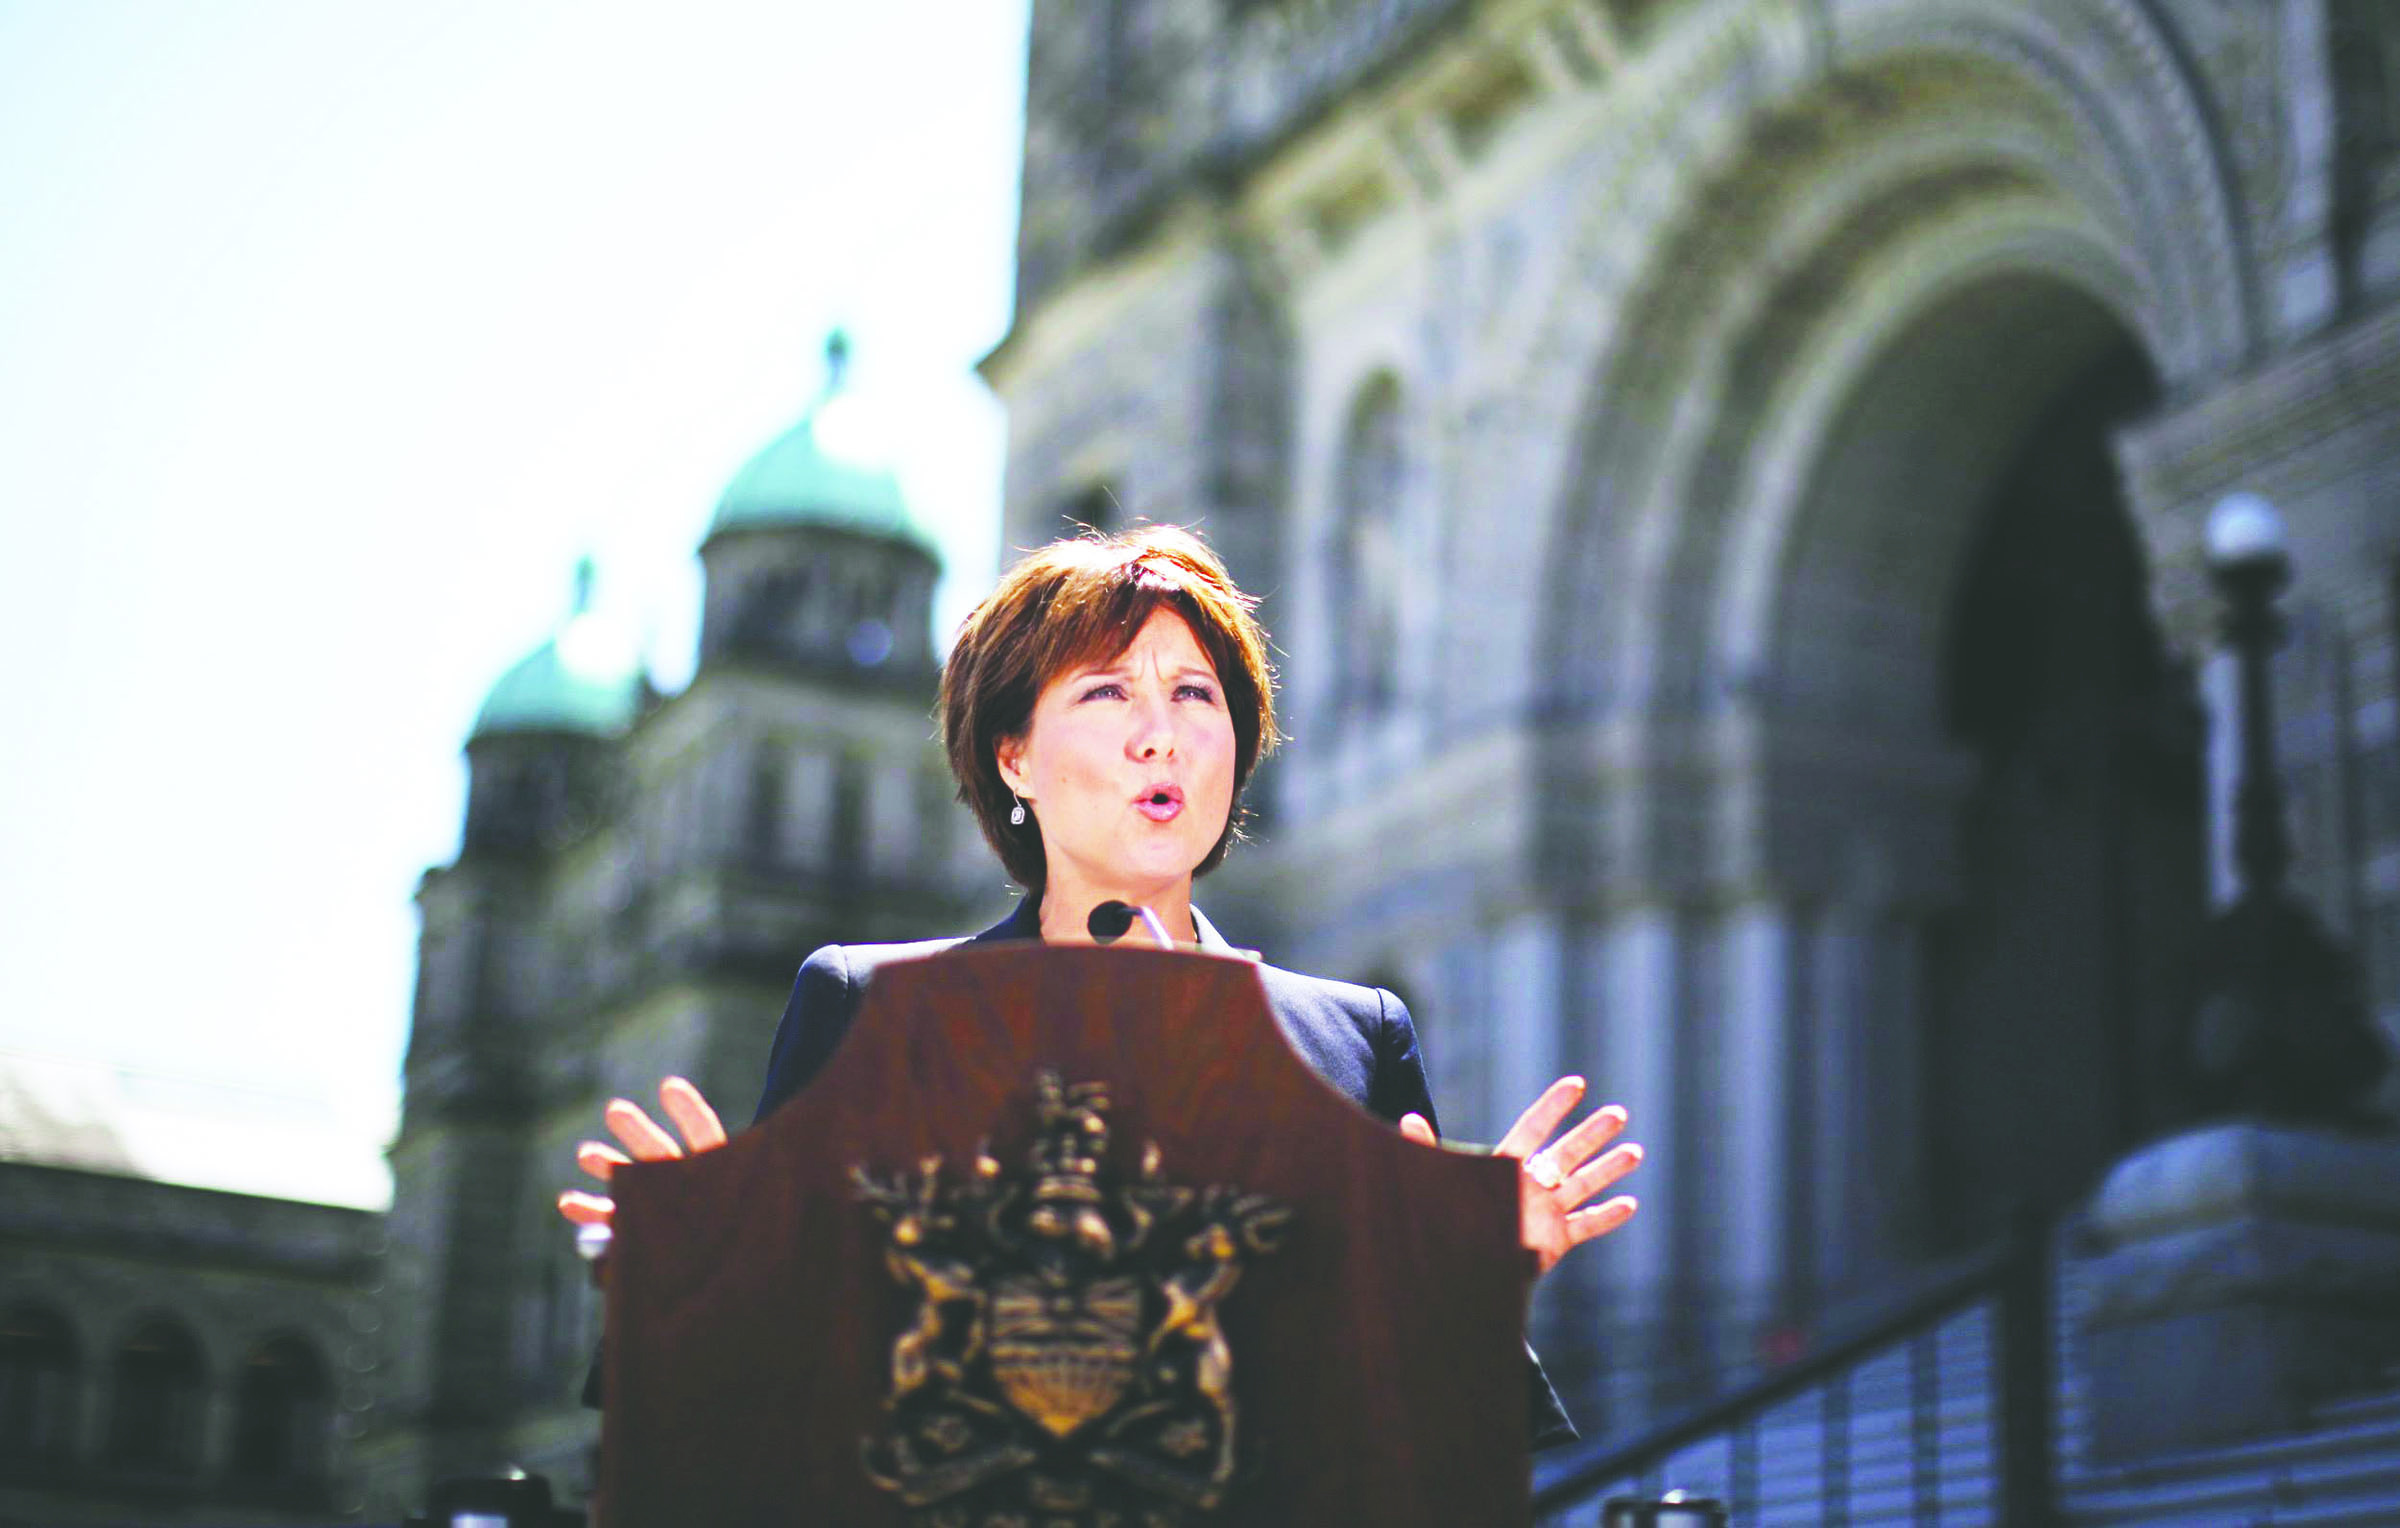 British Columbia Premier Christy Clark speaks to news media outside the British Columbia Legislative Buildings in Victoria today after two Canadian-born citizens were arrested in what police described as al-Qaida-inspired plot to blow up the legislature on Canada Day